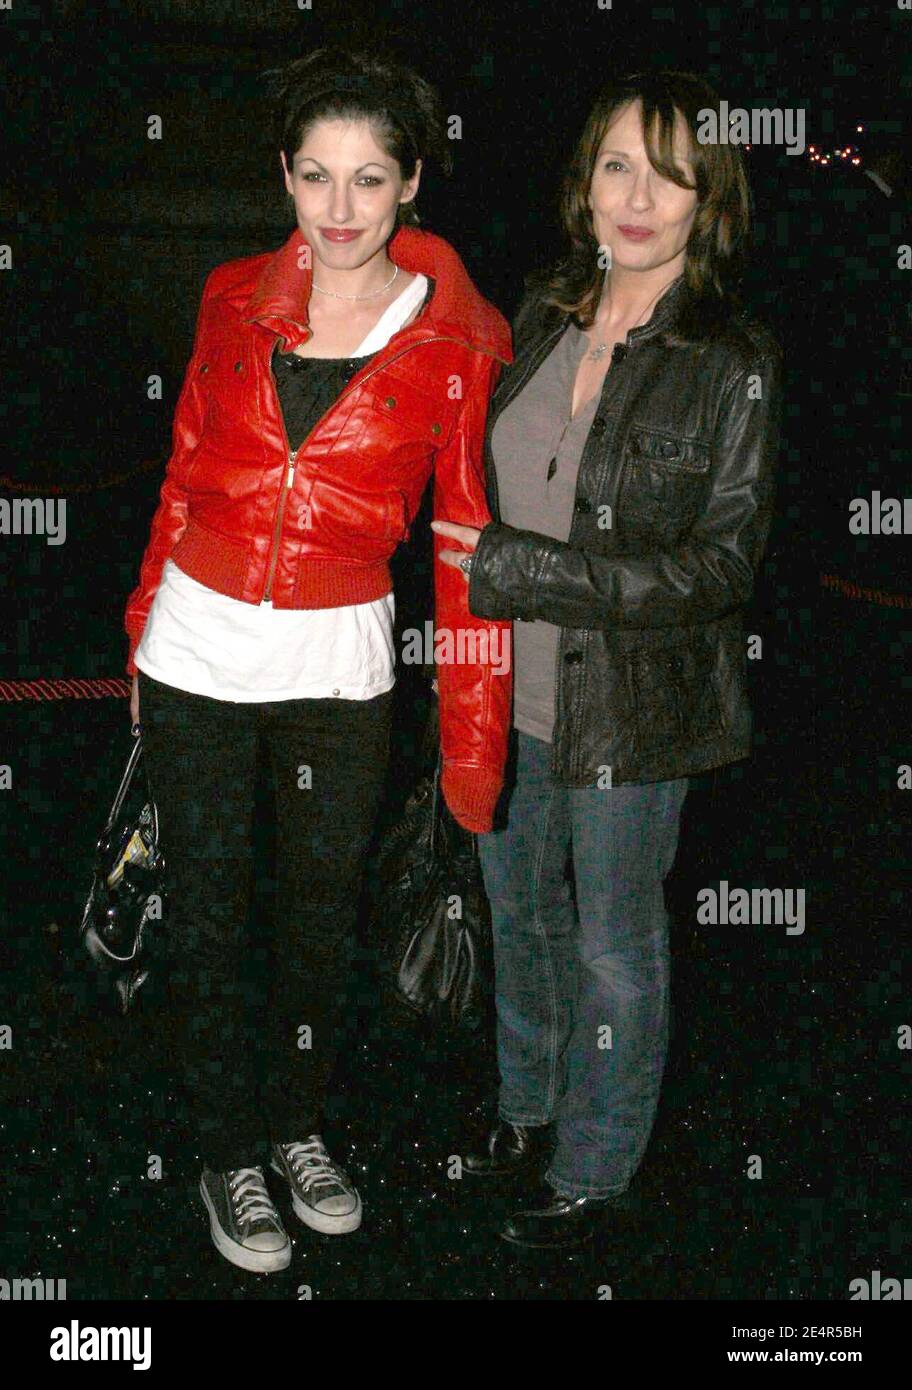 Chantal Lauby with her daughter Superbus singer Jennifer Ayache arrive at the Swarovski party at the ShowCase in Paris, France on February 28, 2008. Photo by ABACAPRESS.COM Stock Photo